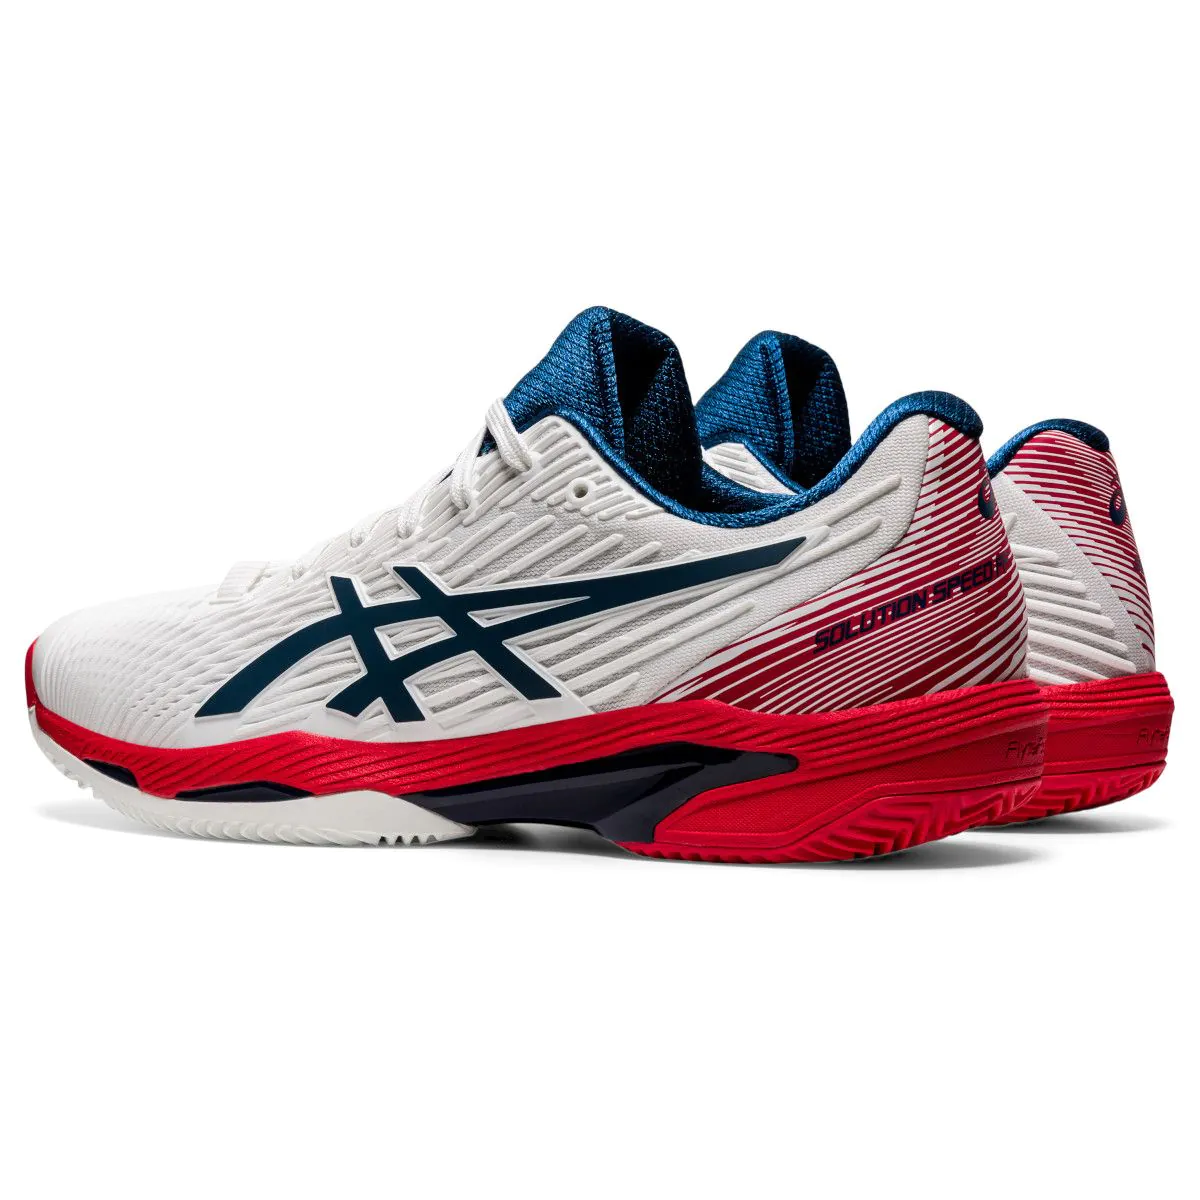 Asics Solution Speed FF 2.0 Clay Men's Tennis Shoes 1041A187